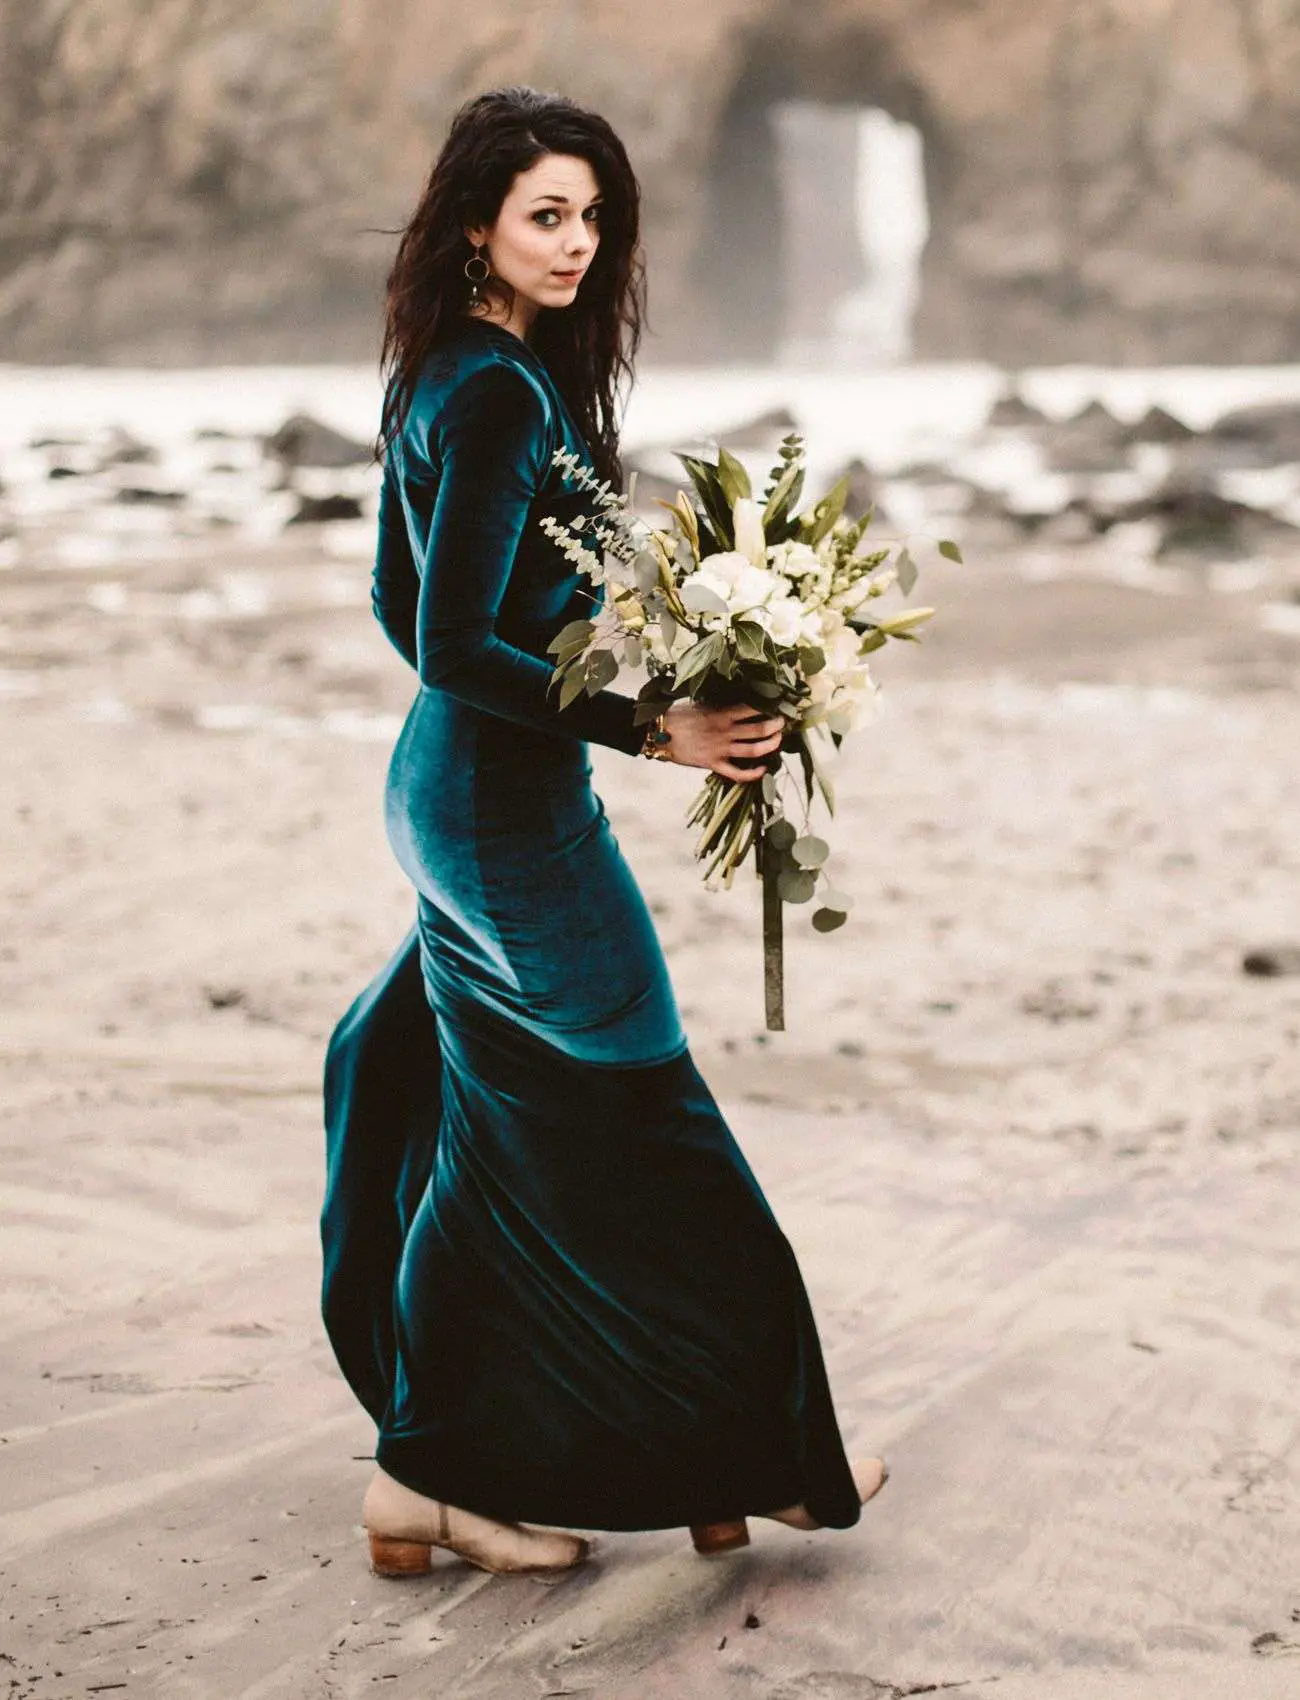 The Bride Wore a Teal Velvet Wedding Dress in this Big Sur ...